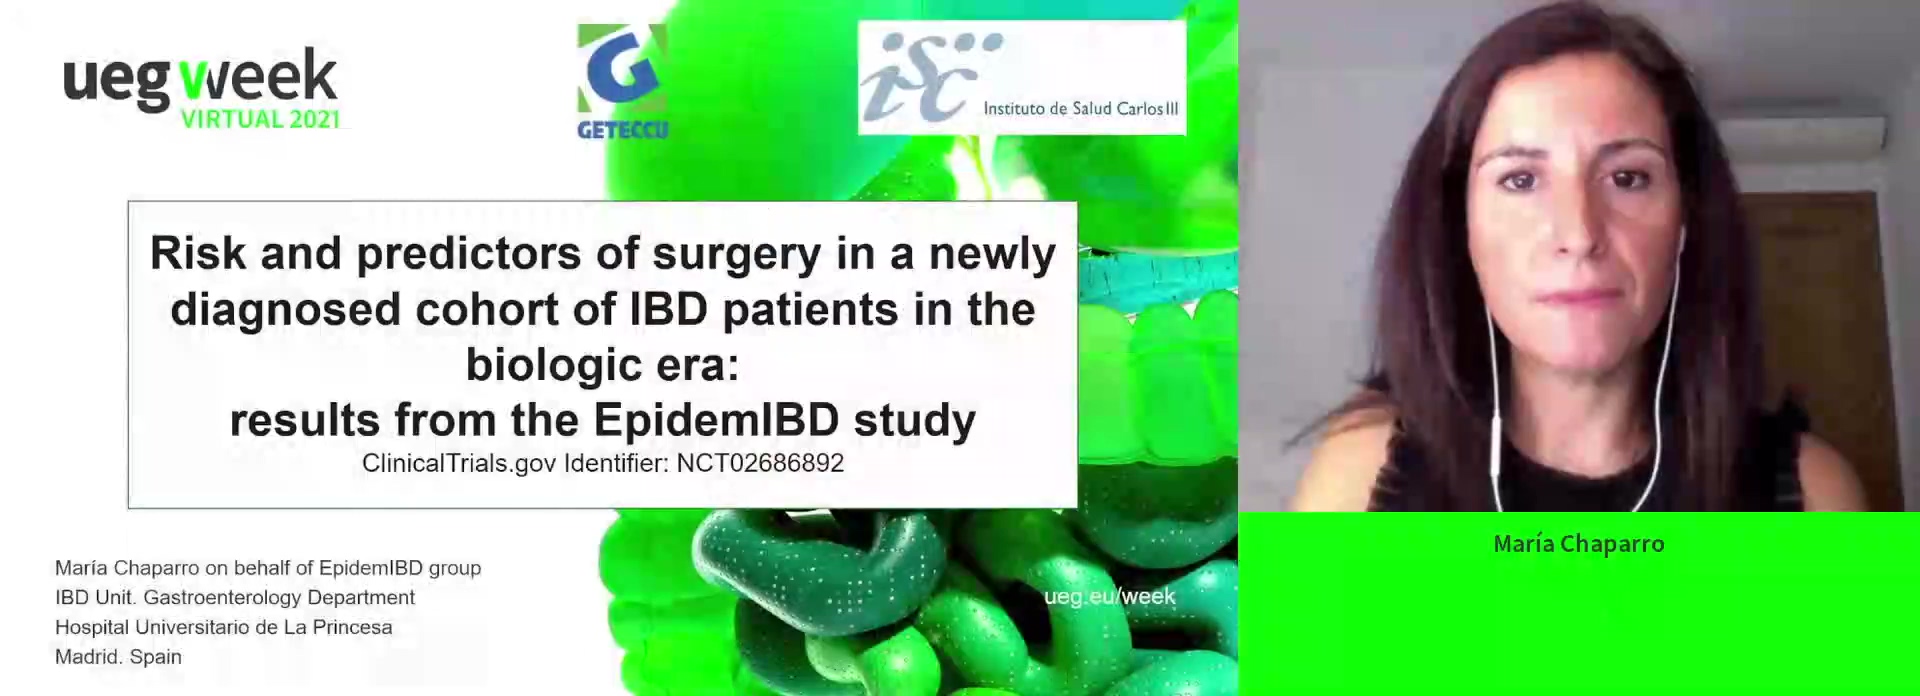 RISK AND PREDICTORS OF SURGERY IN A NEWLY DIAGNOSED COHORT OF IBD PATIENTS IN THE BIOLOGIC ERA: RESULTS FROM THE EPIDEMIBD STUDY